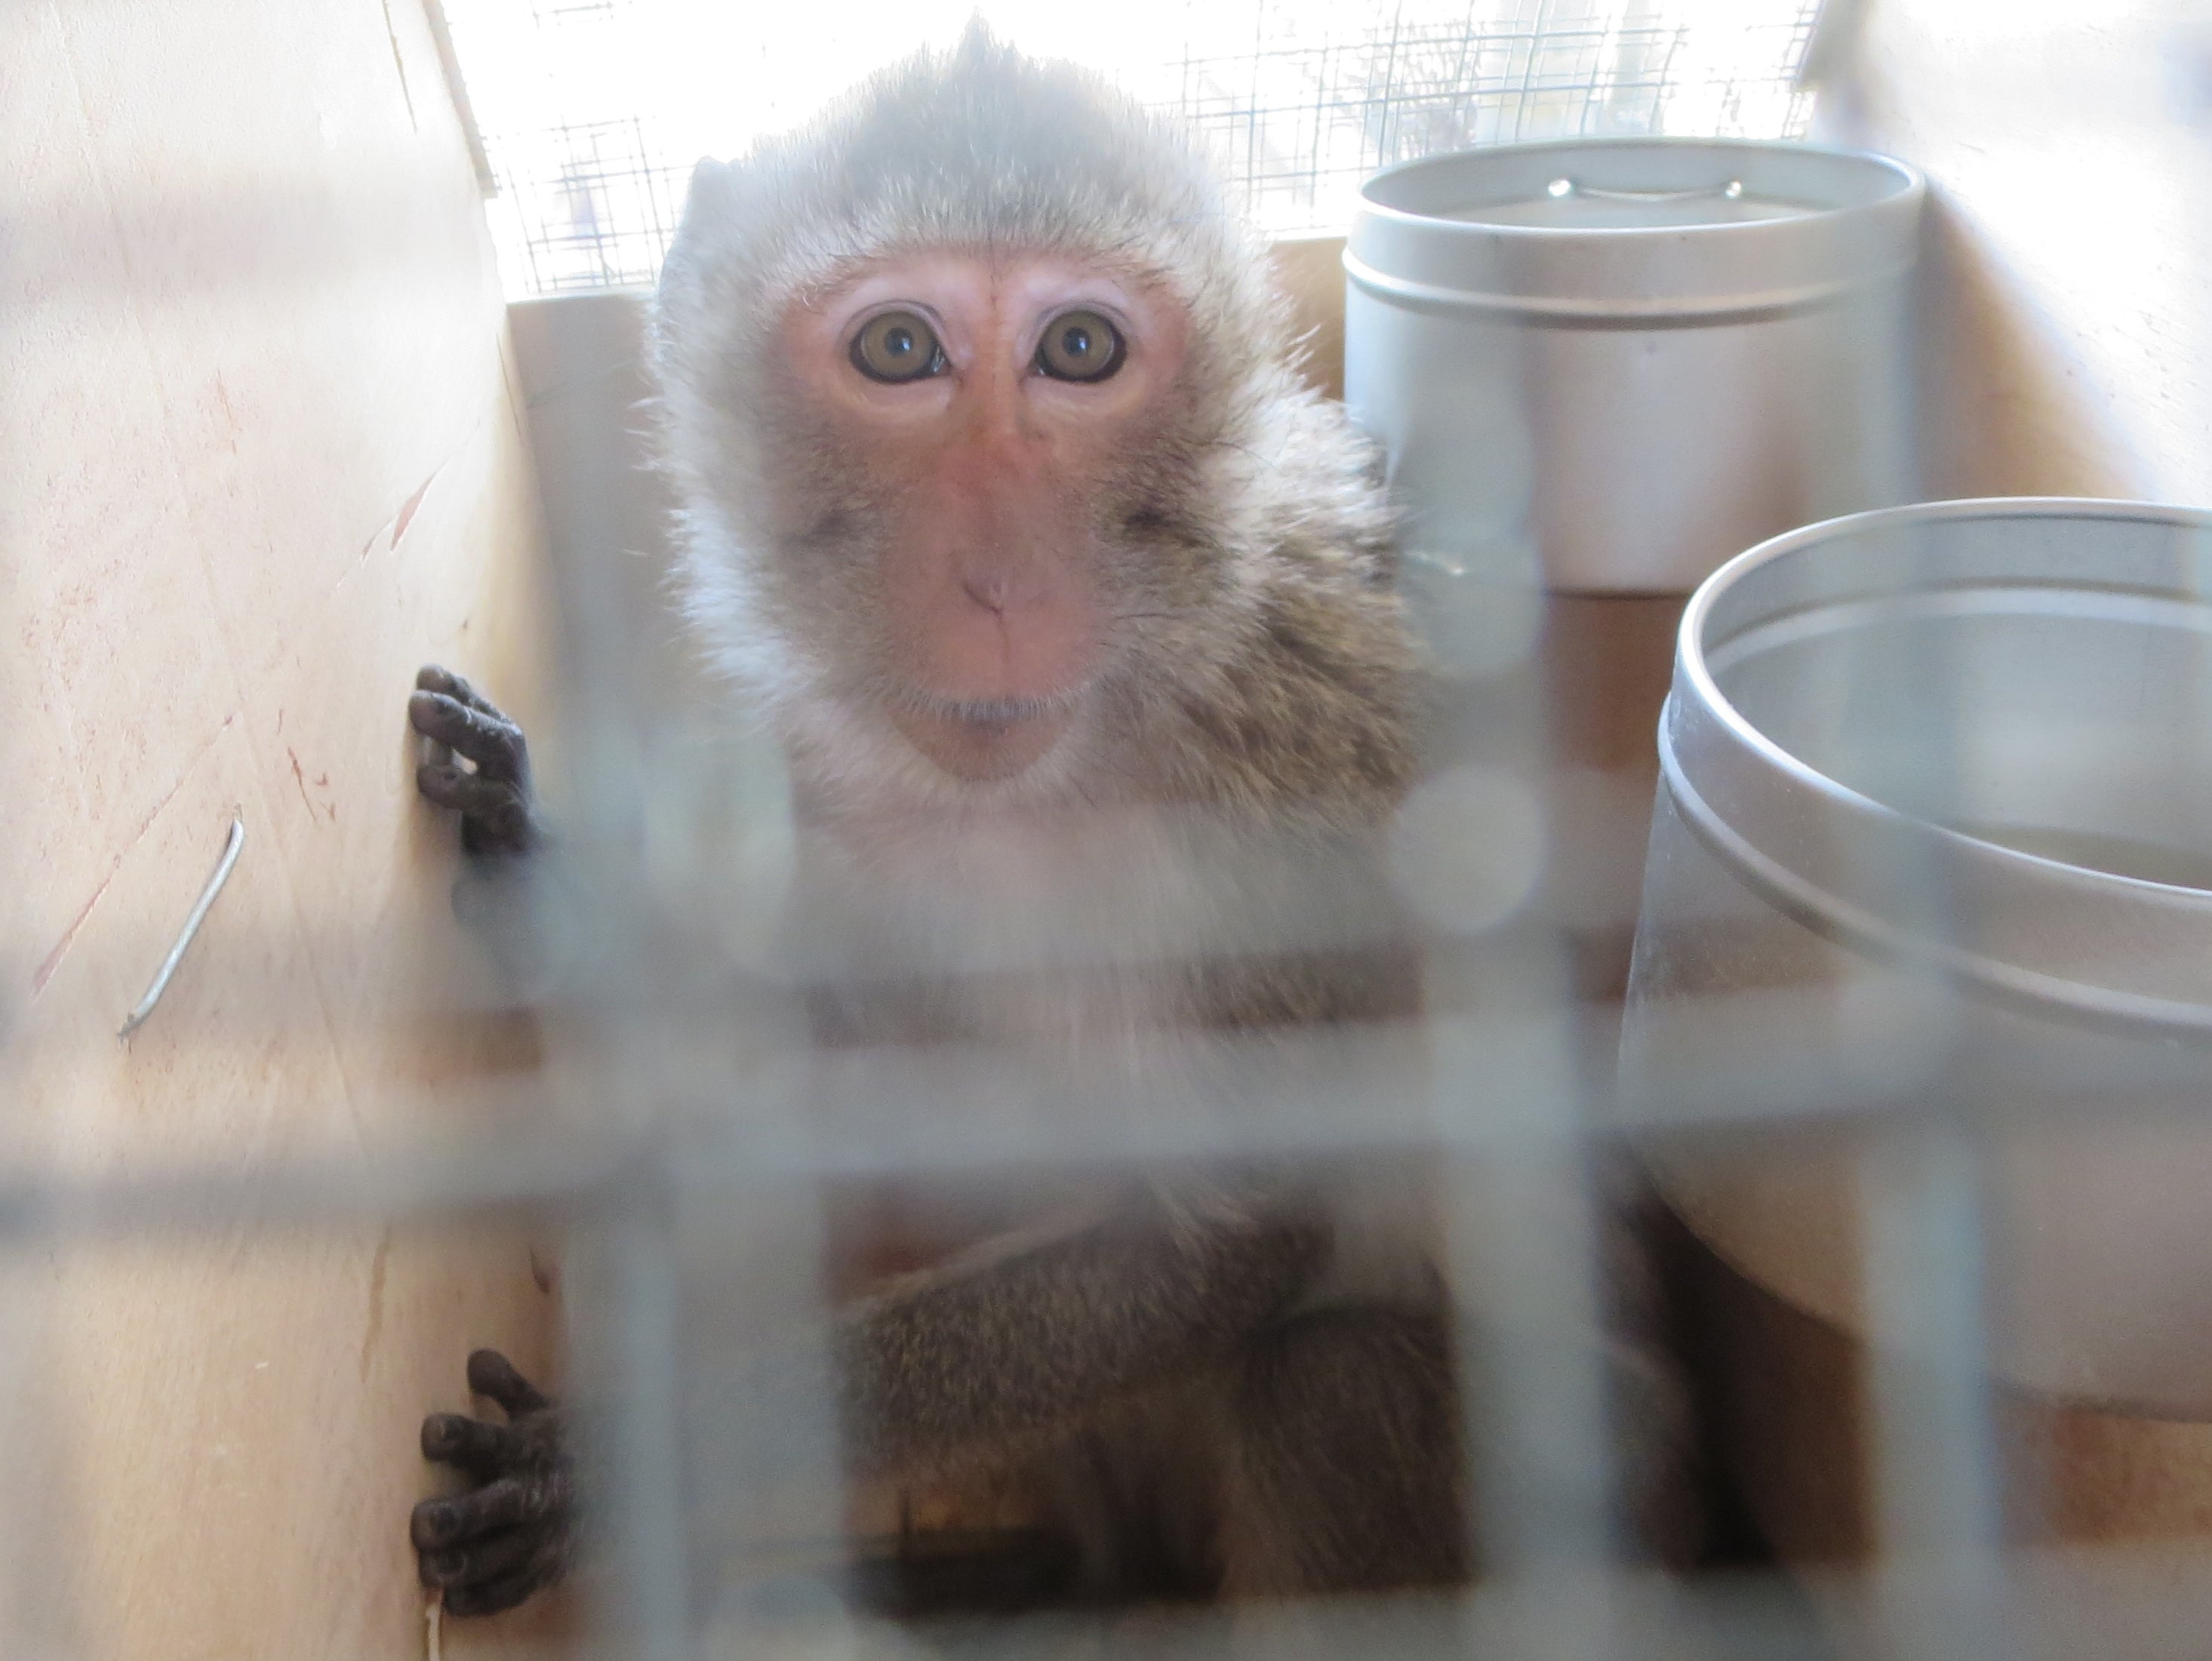 Charles River Laboratories imported the long-tailed macaques from Asia